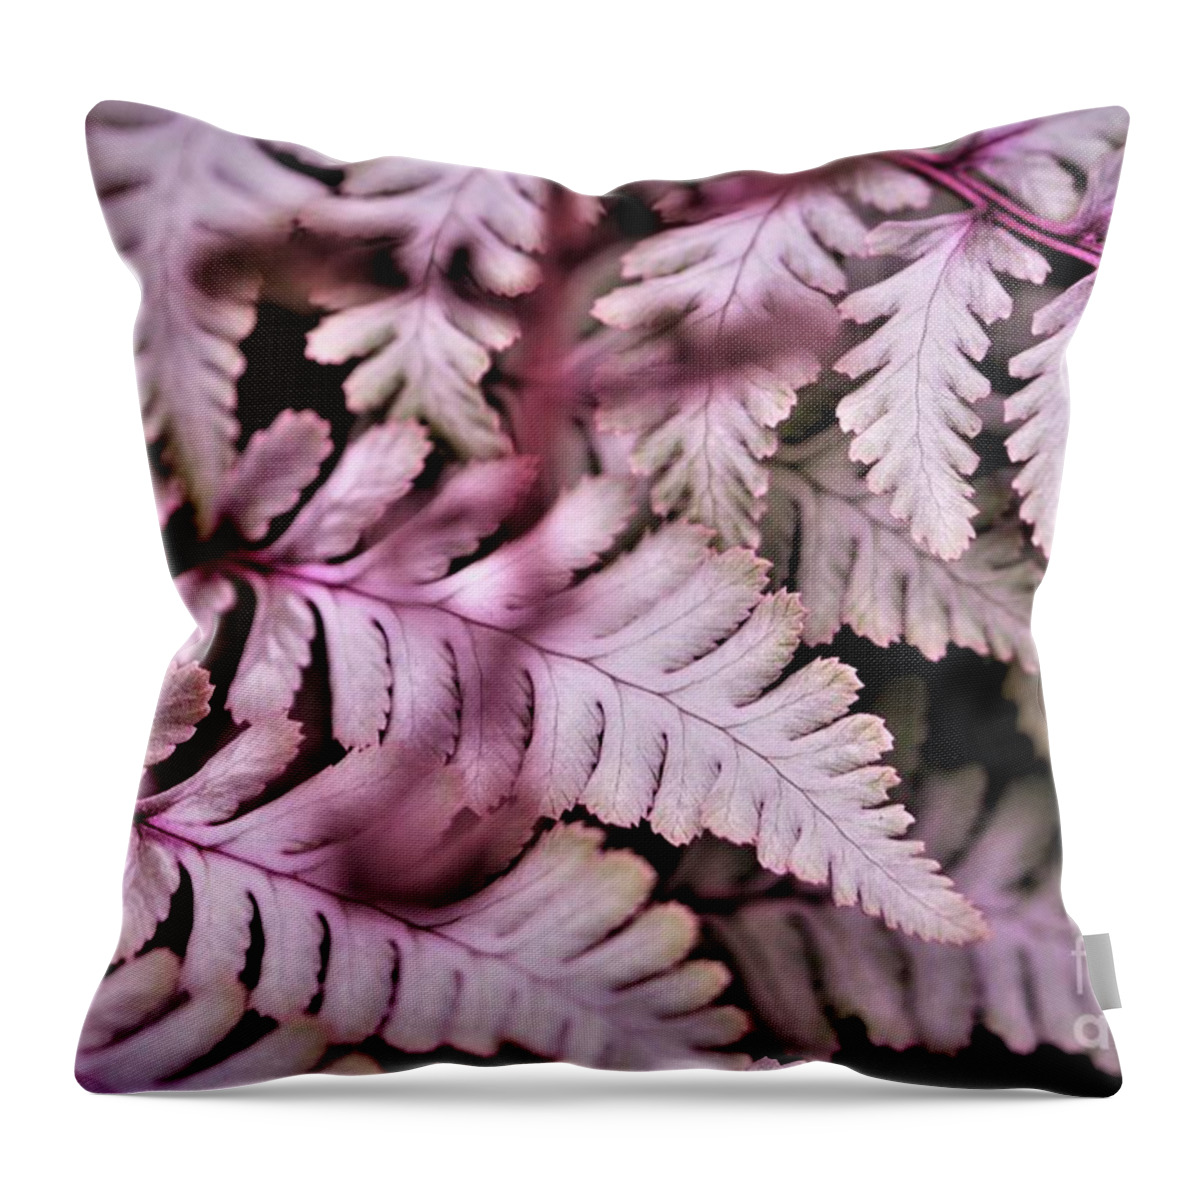 Pink Throw Pillow featuring the photograph Pink Fern by Tracey Lee Cassin